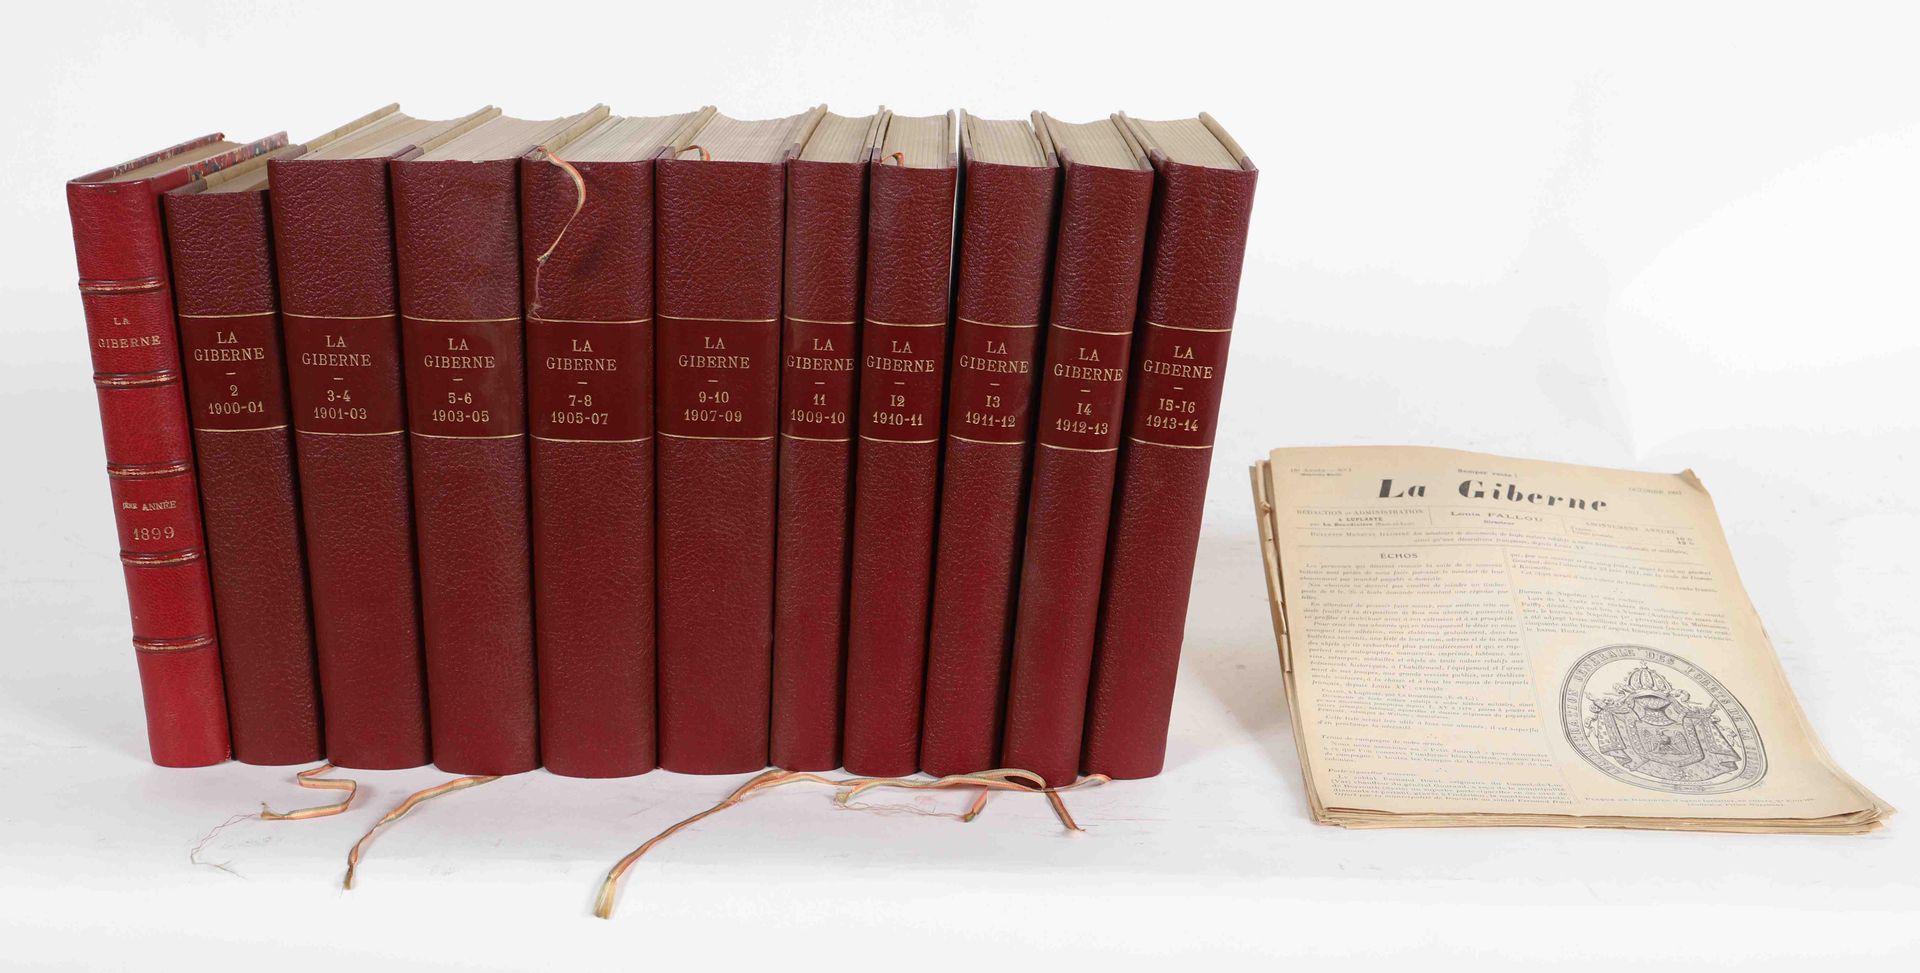 Null "La Giberne" Louis FALLOU

Original and complete bound collection of 11 vol&hellip;